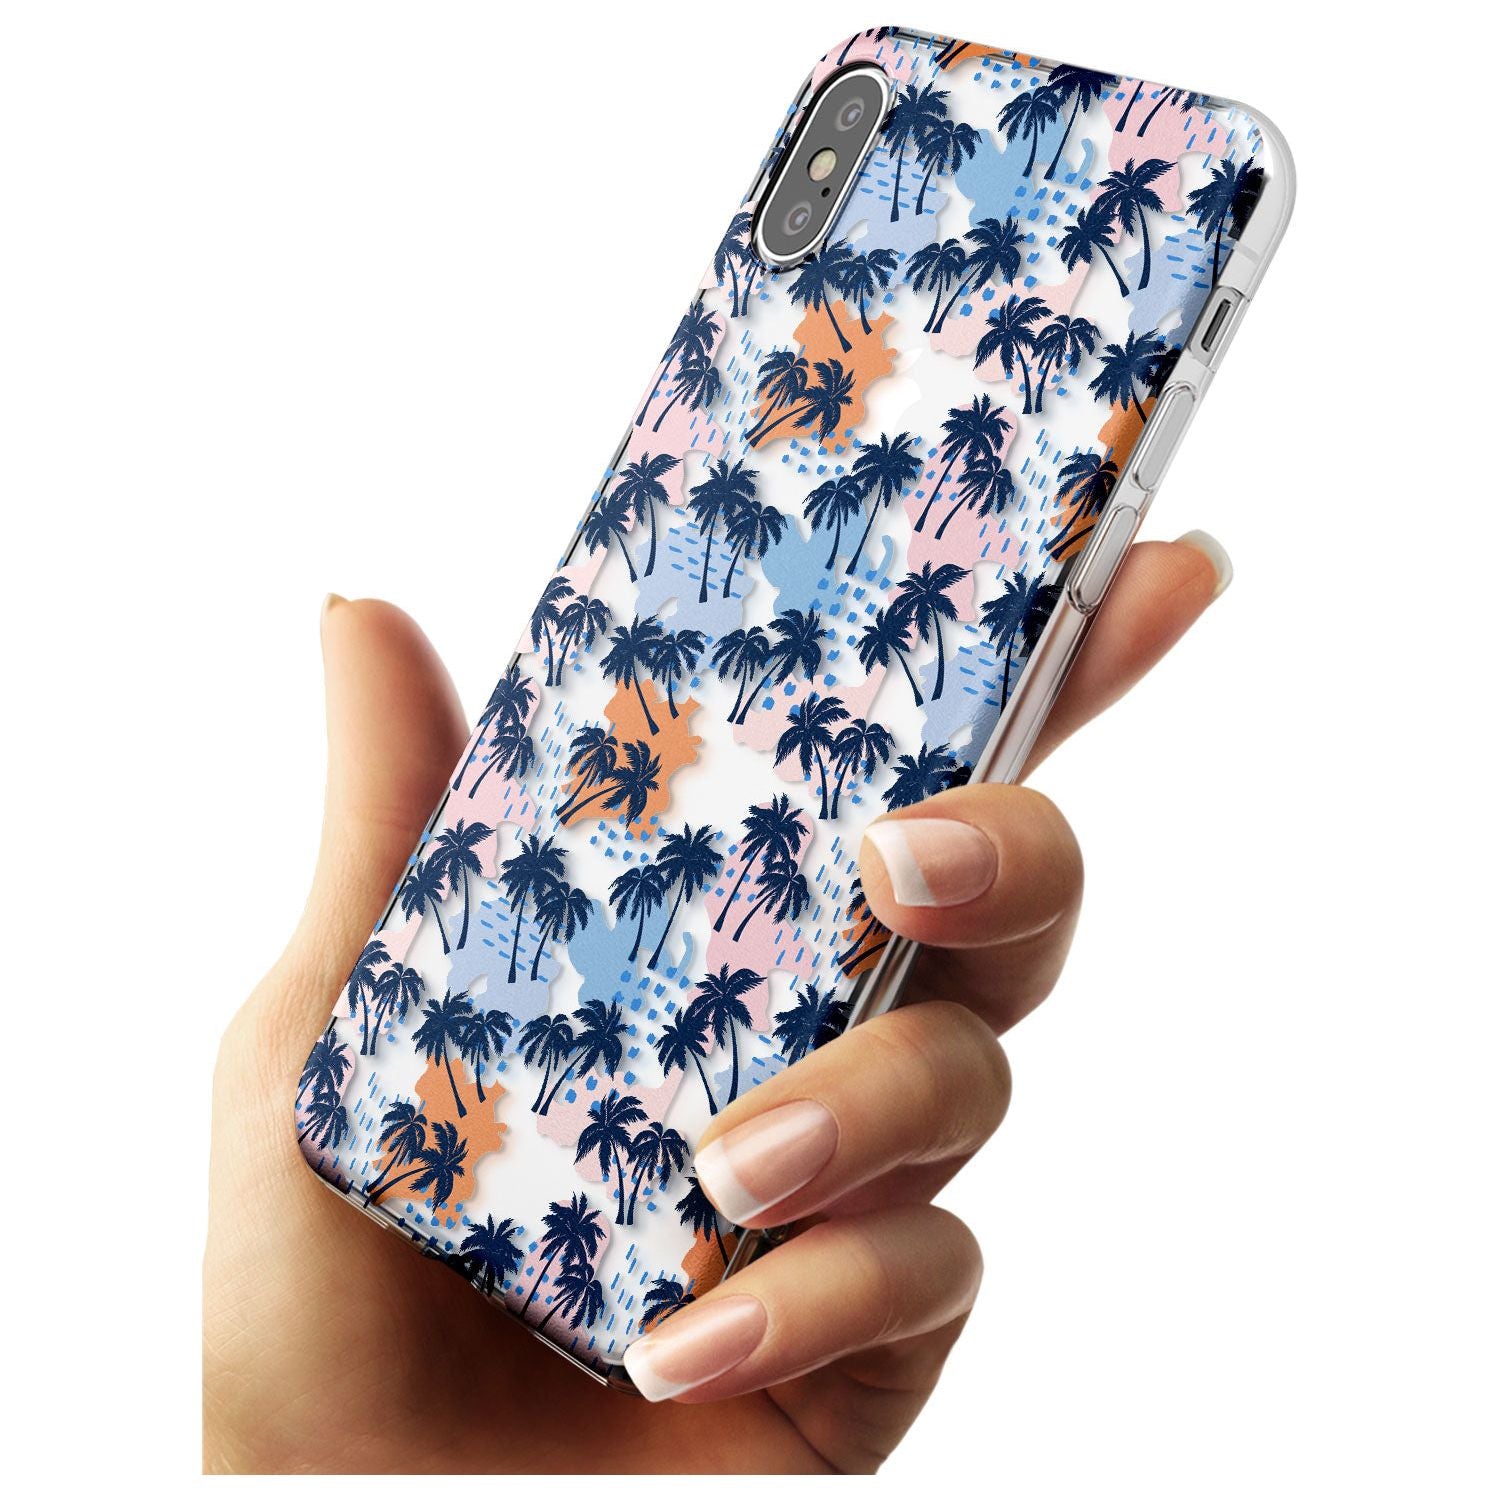 Summer Palm Trees (Clear) Black Impact Phone Case for iPhone X XS Max XR